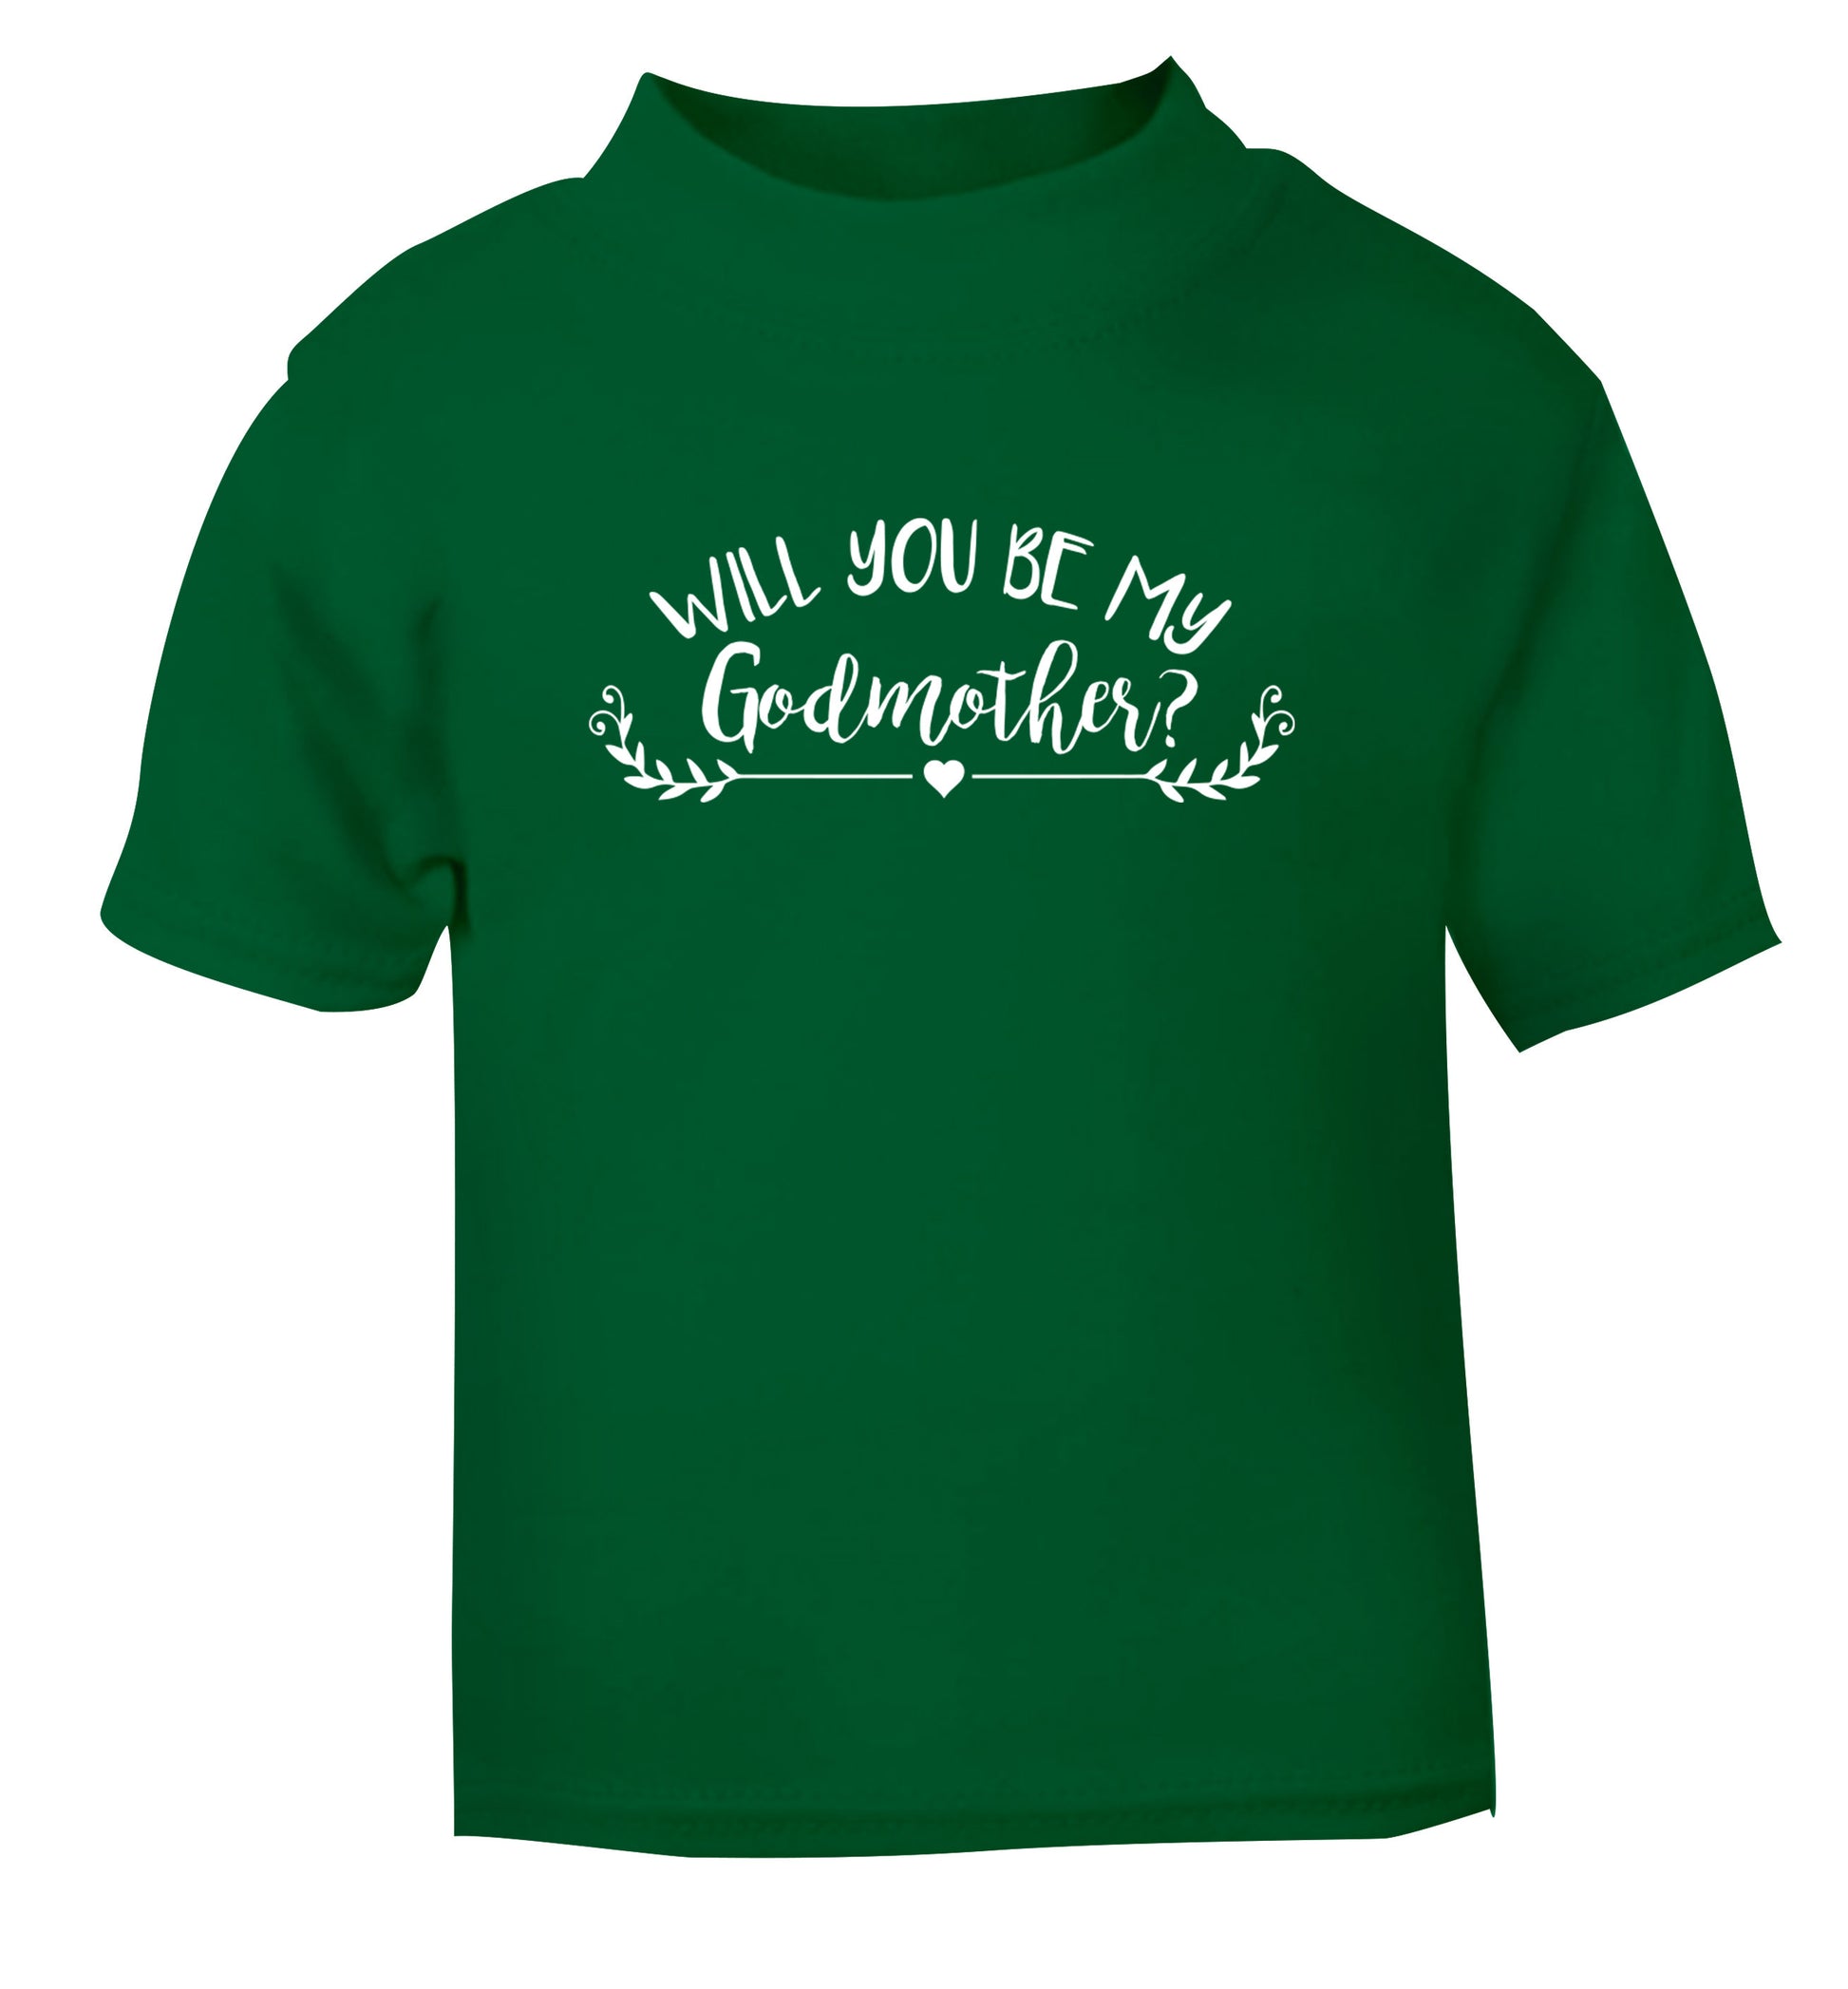 Will you be my godmother? green Baby Toddler Tshirt 2 Years